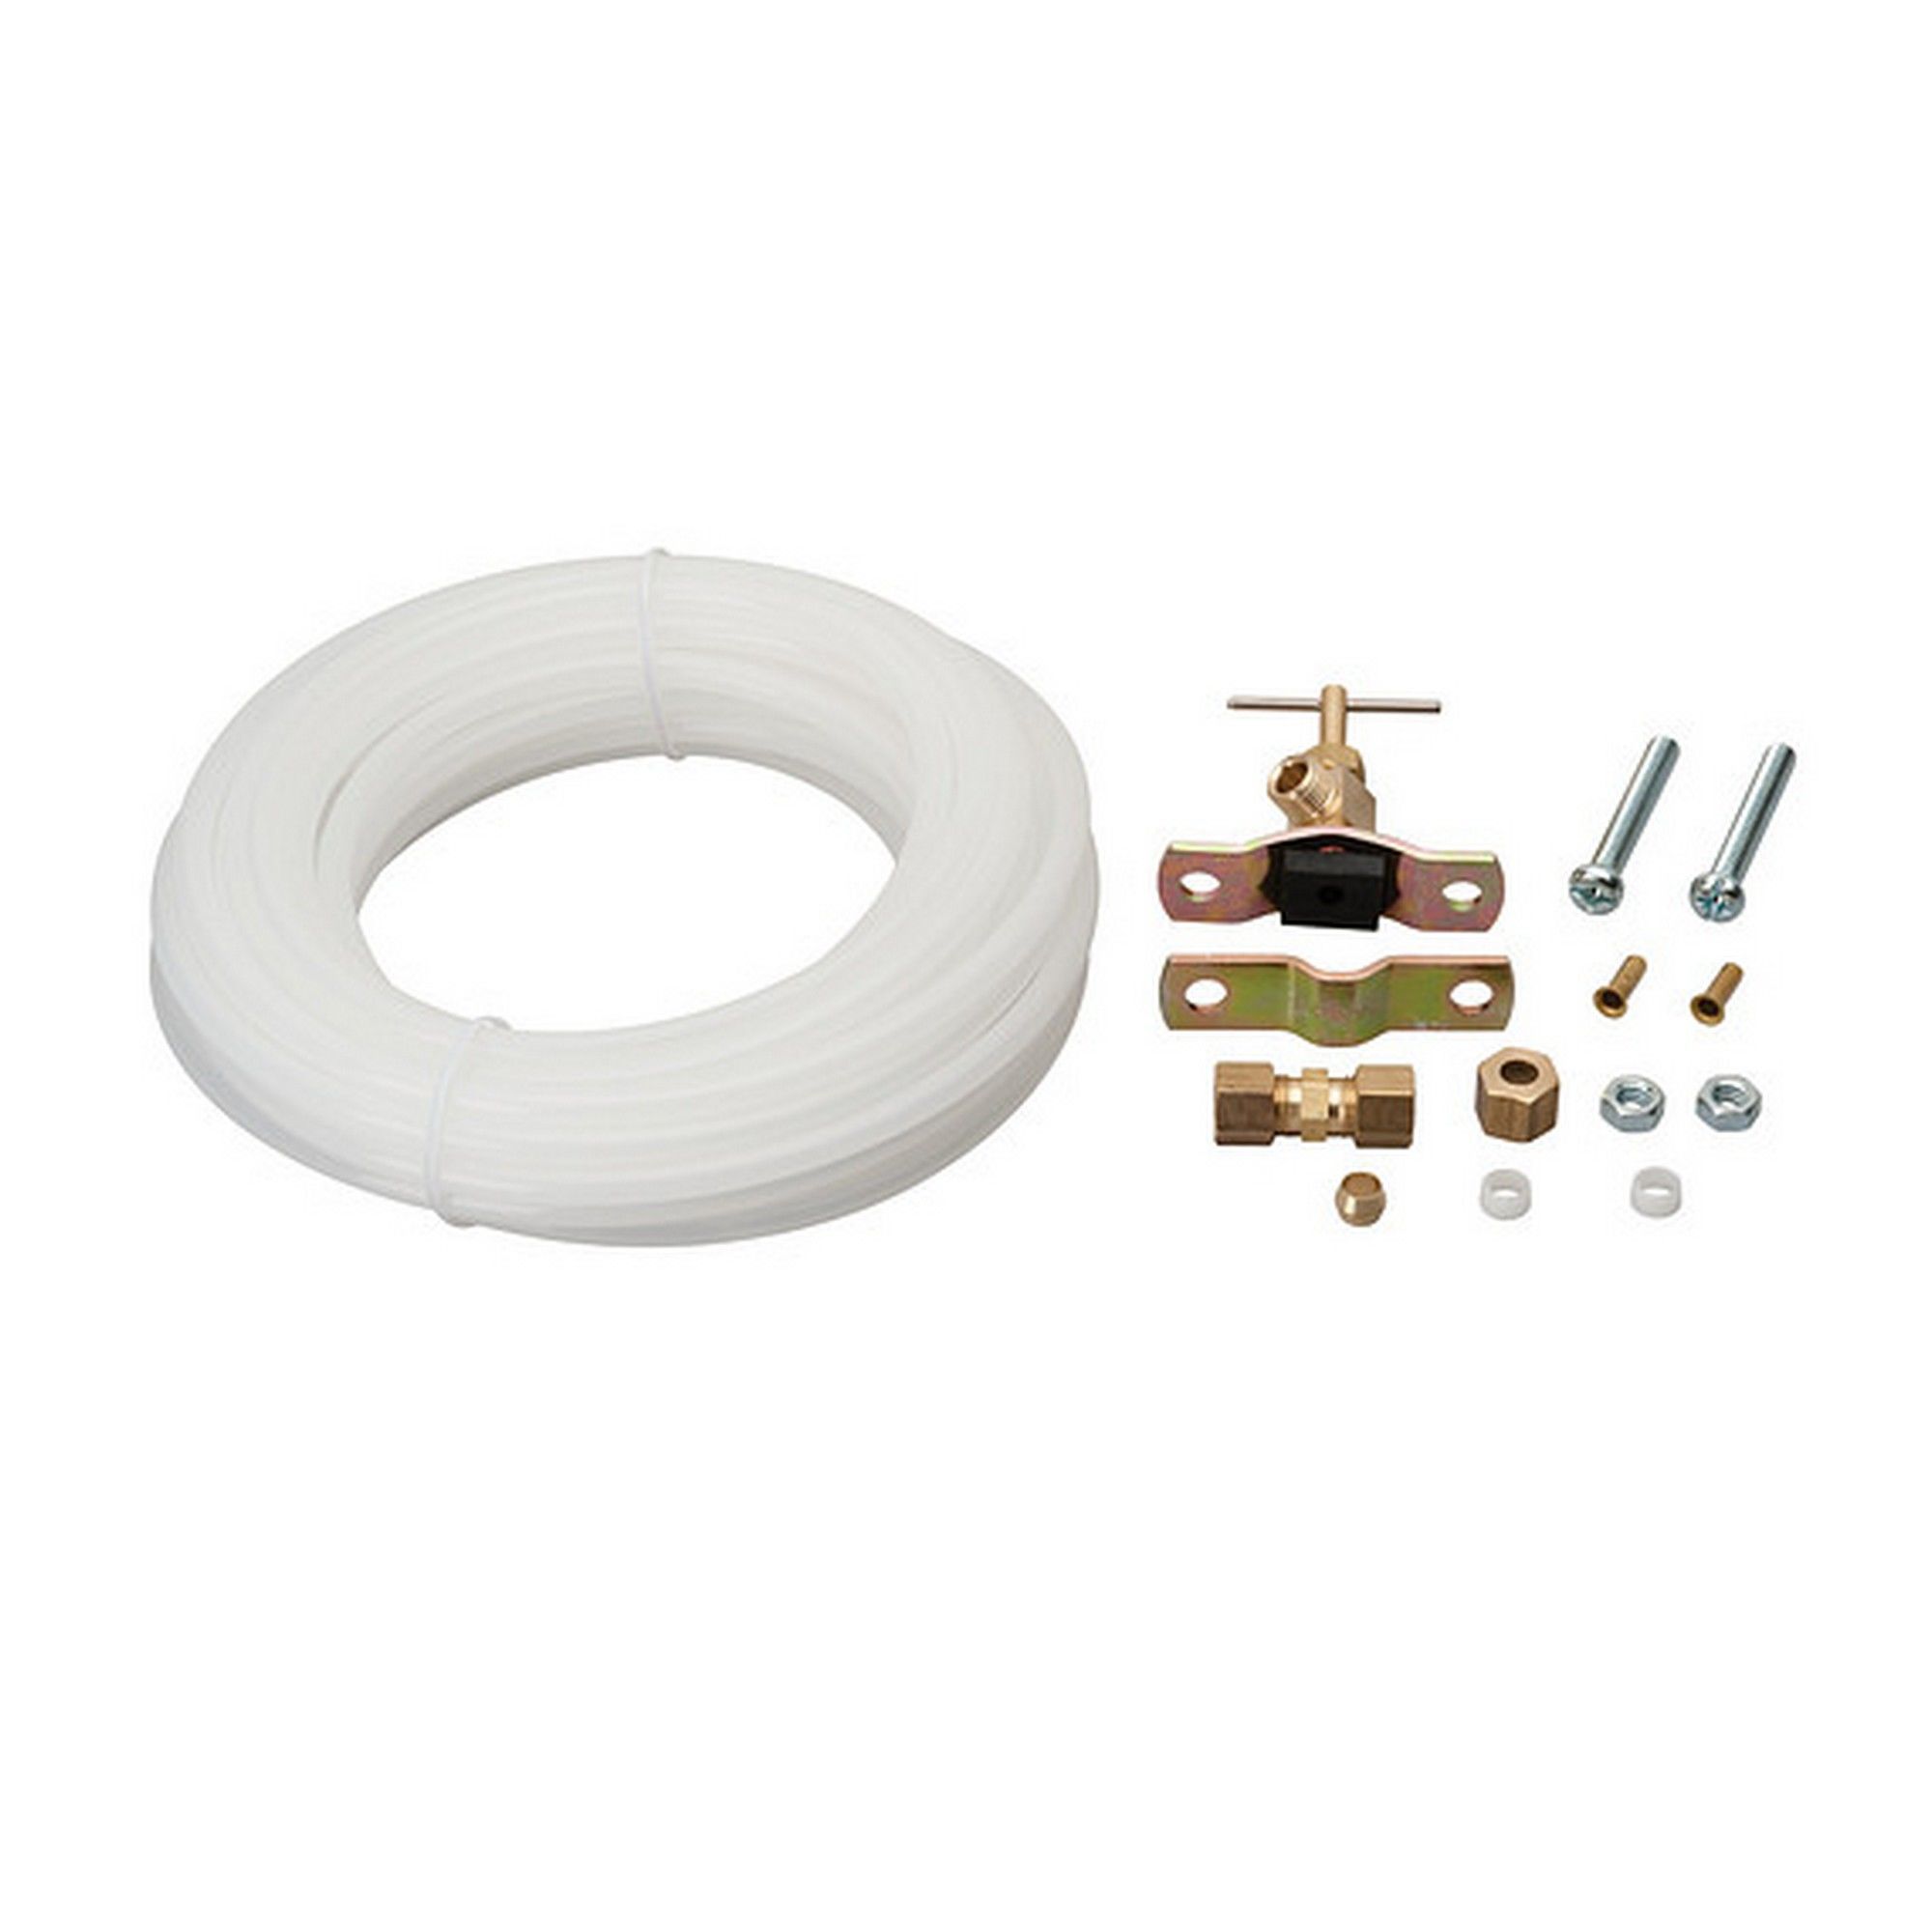 Lasco 25 Ft. x 1/4 In. Poly Tubing Ice Maker Installation Kit